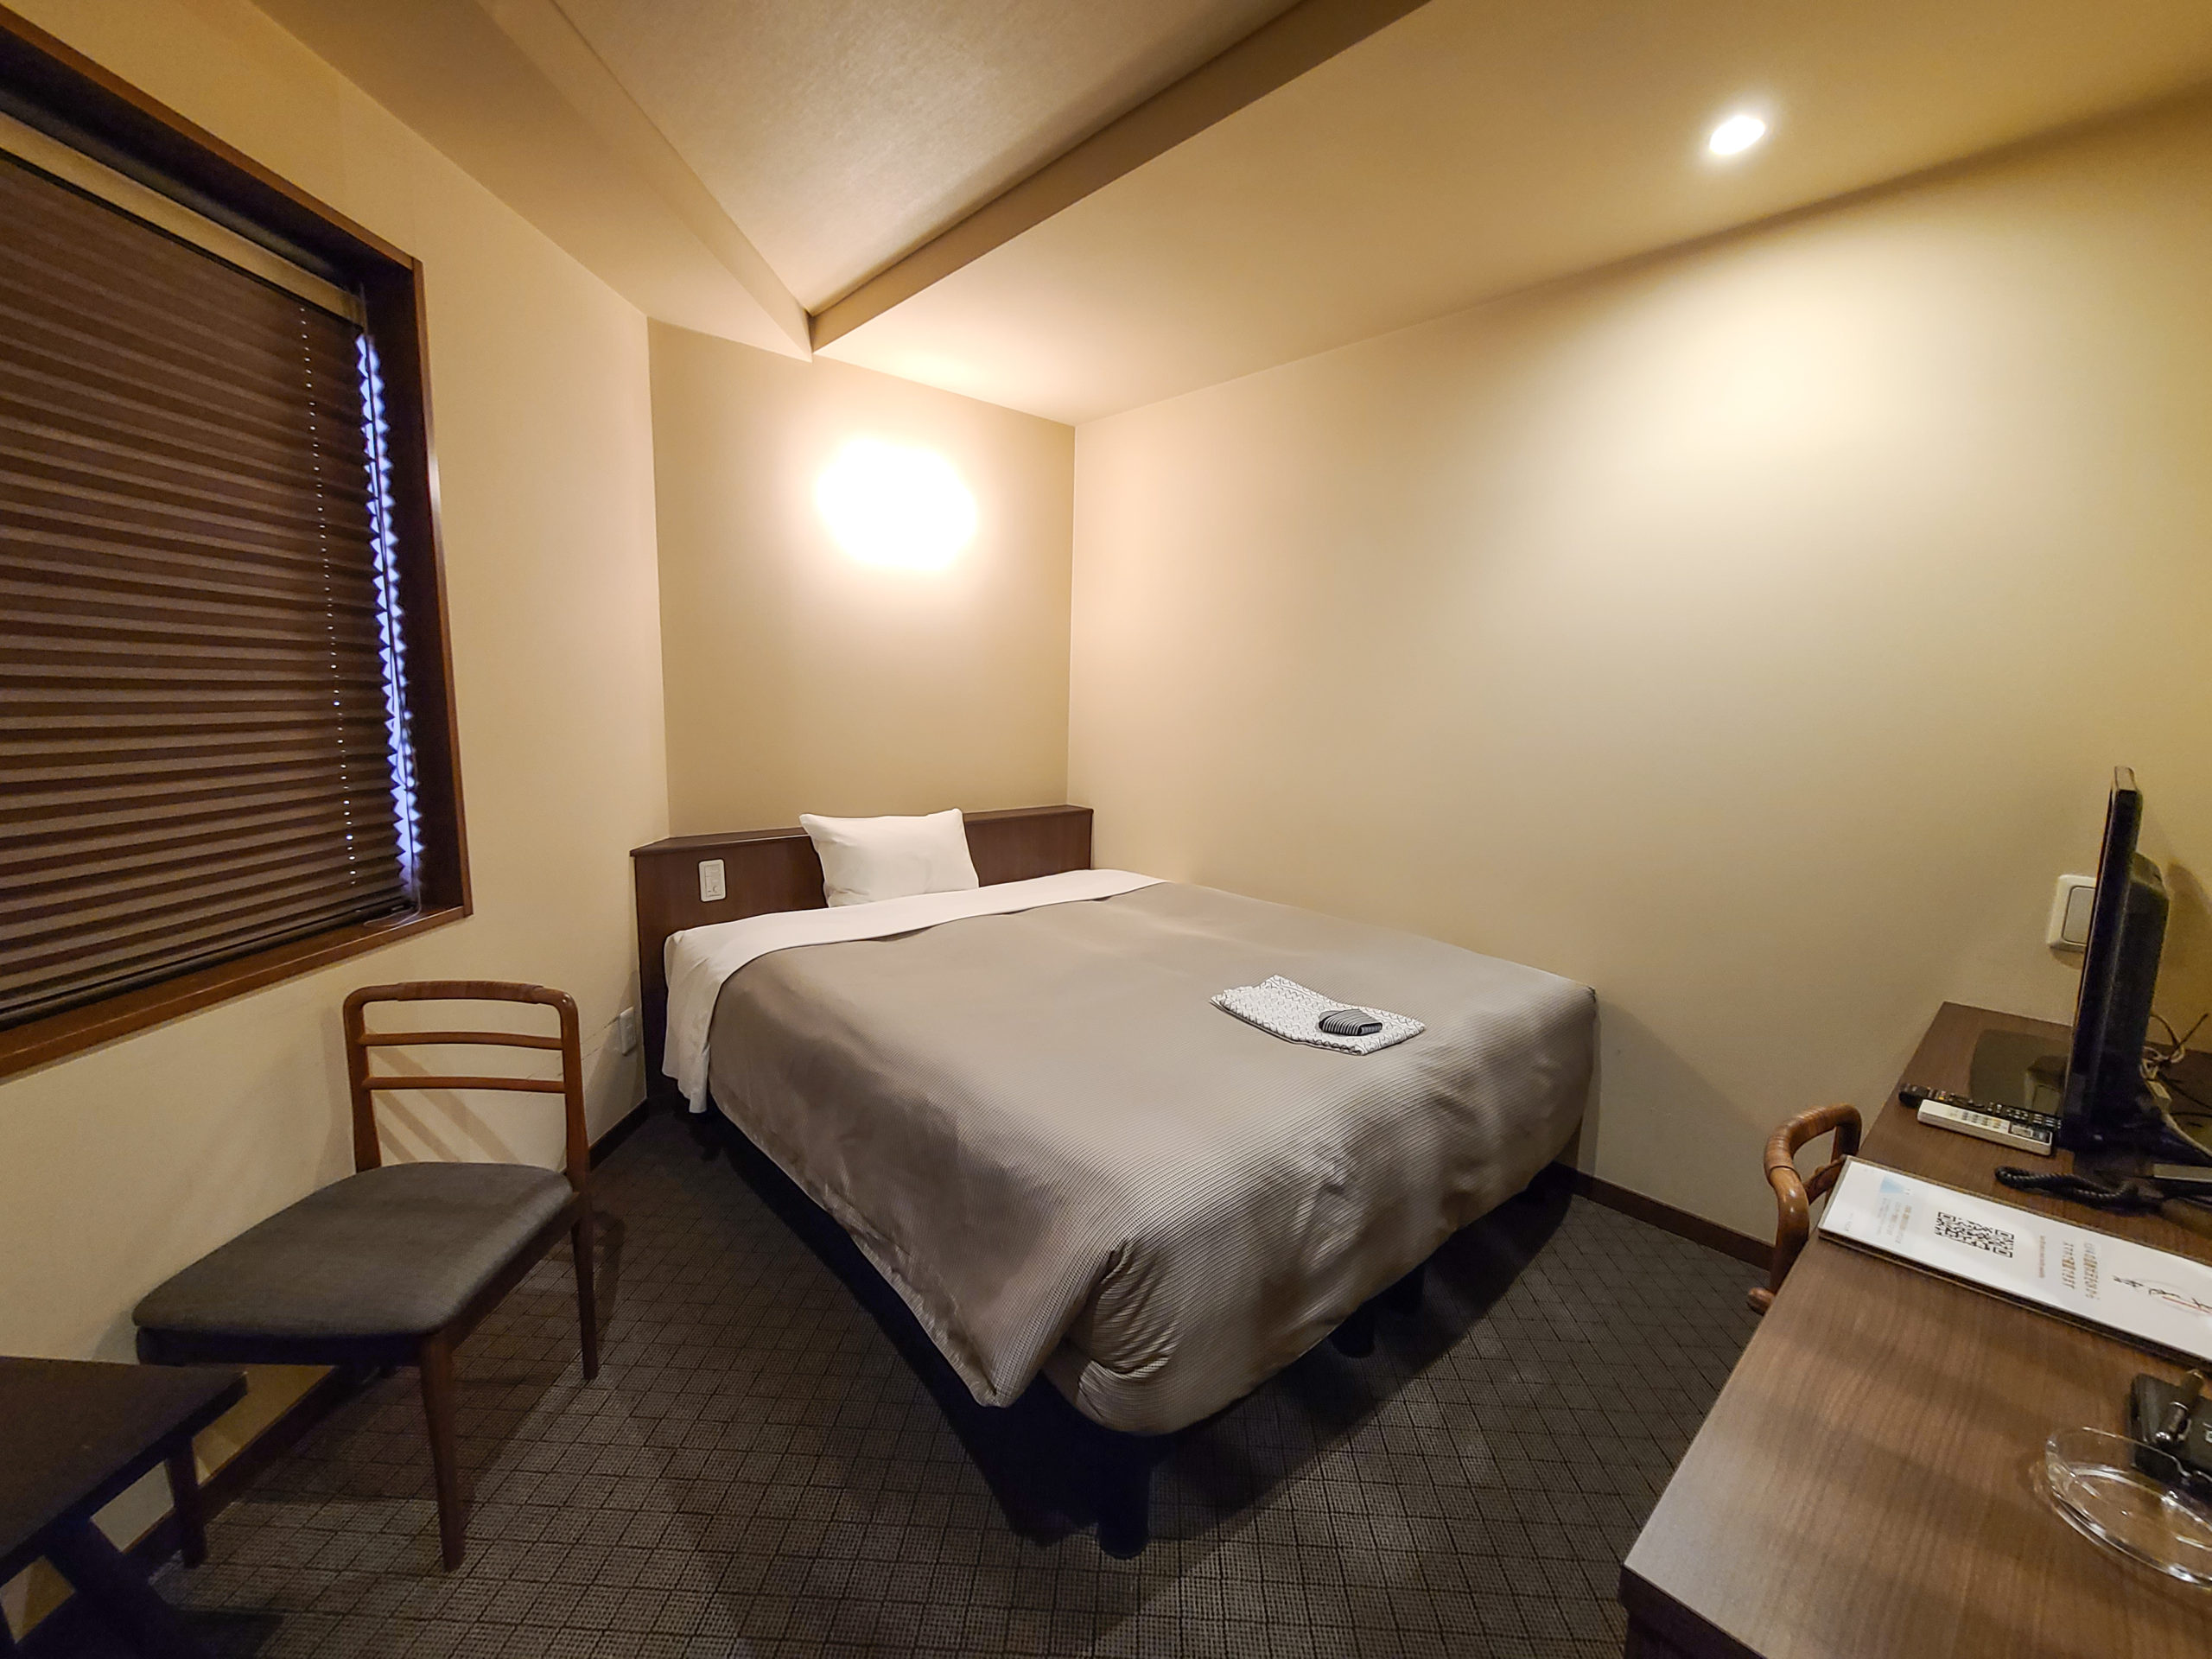 While the Japanese-style rooms use futons for bedding, the western-style rooms here all use Serta mattresses to ensure a good night’s rest for their guests. 